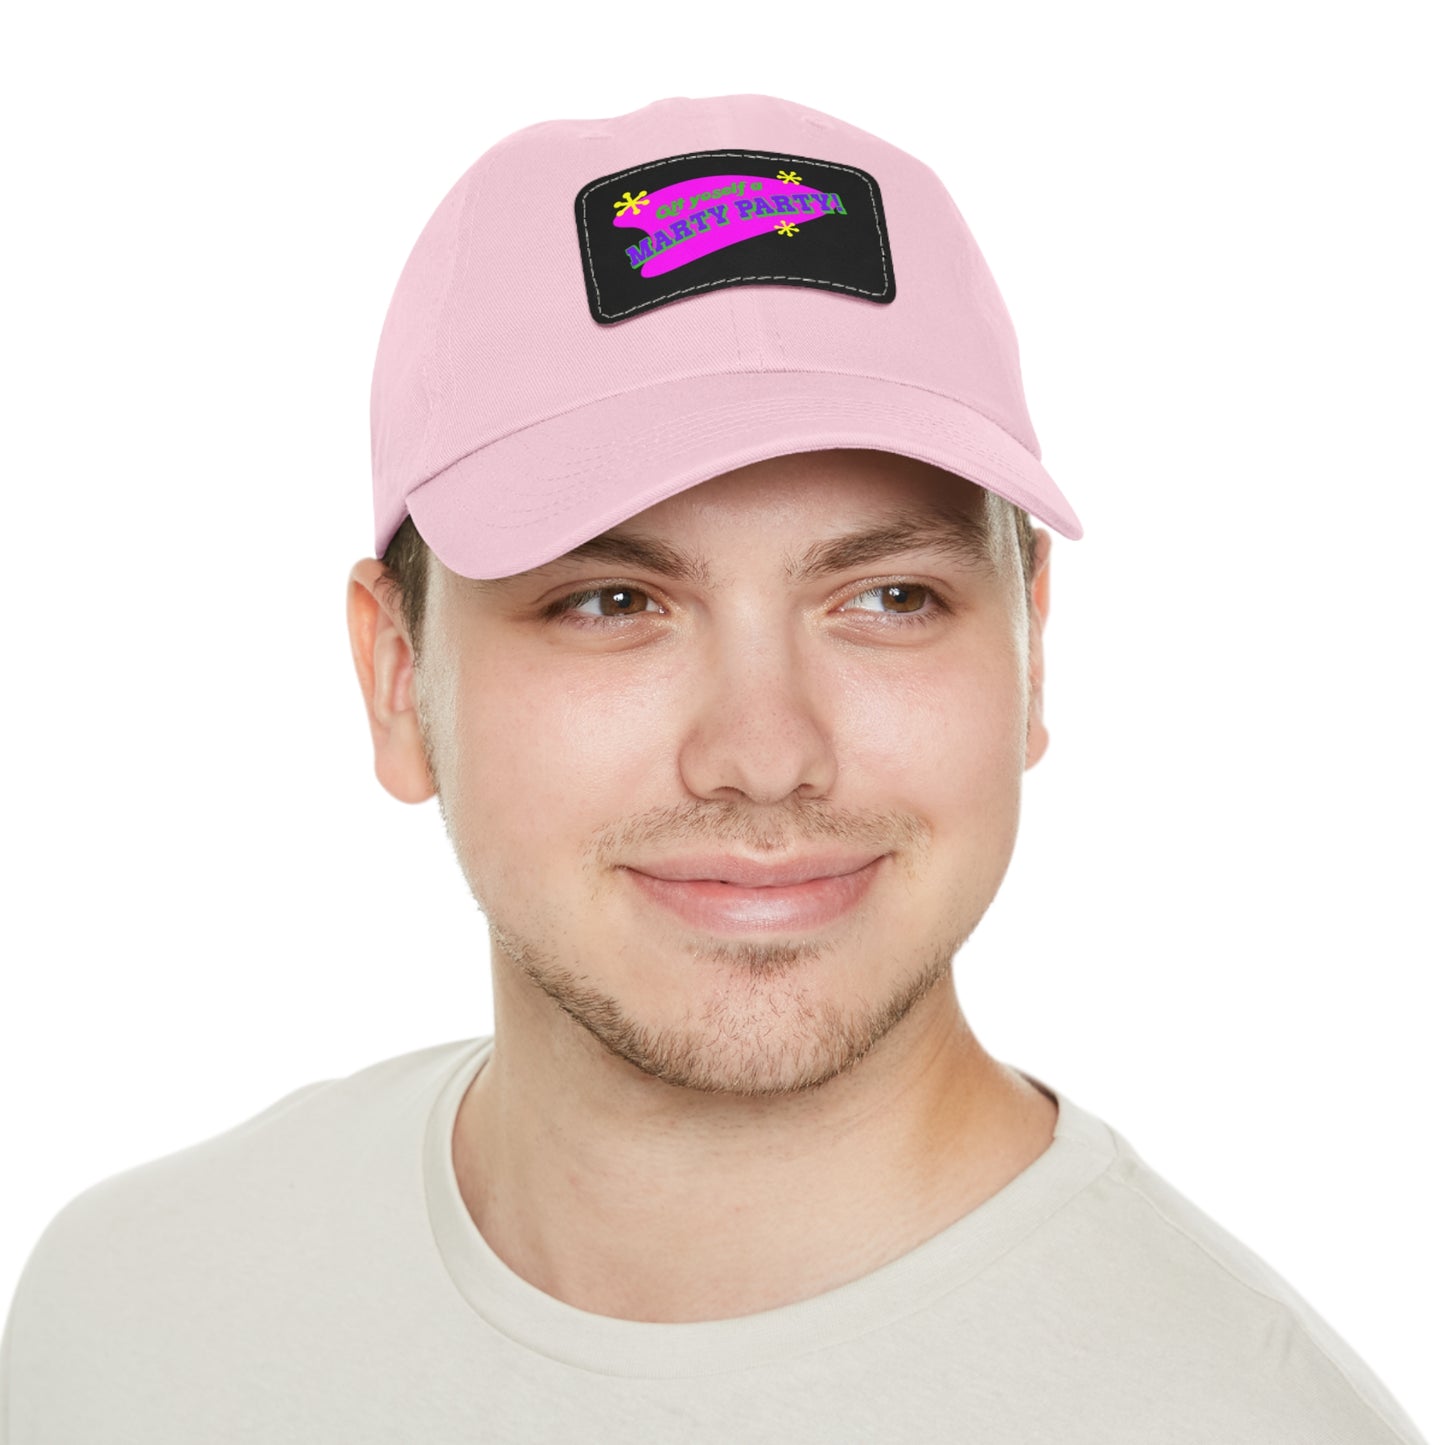 Marty Party Dad Hat with Leather Patch (Rectangle)